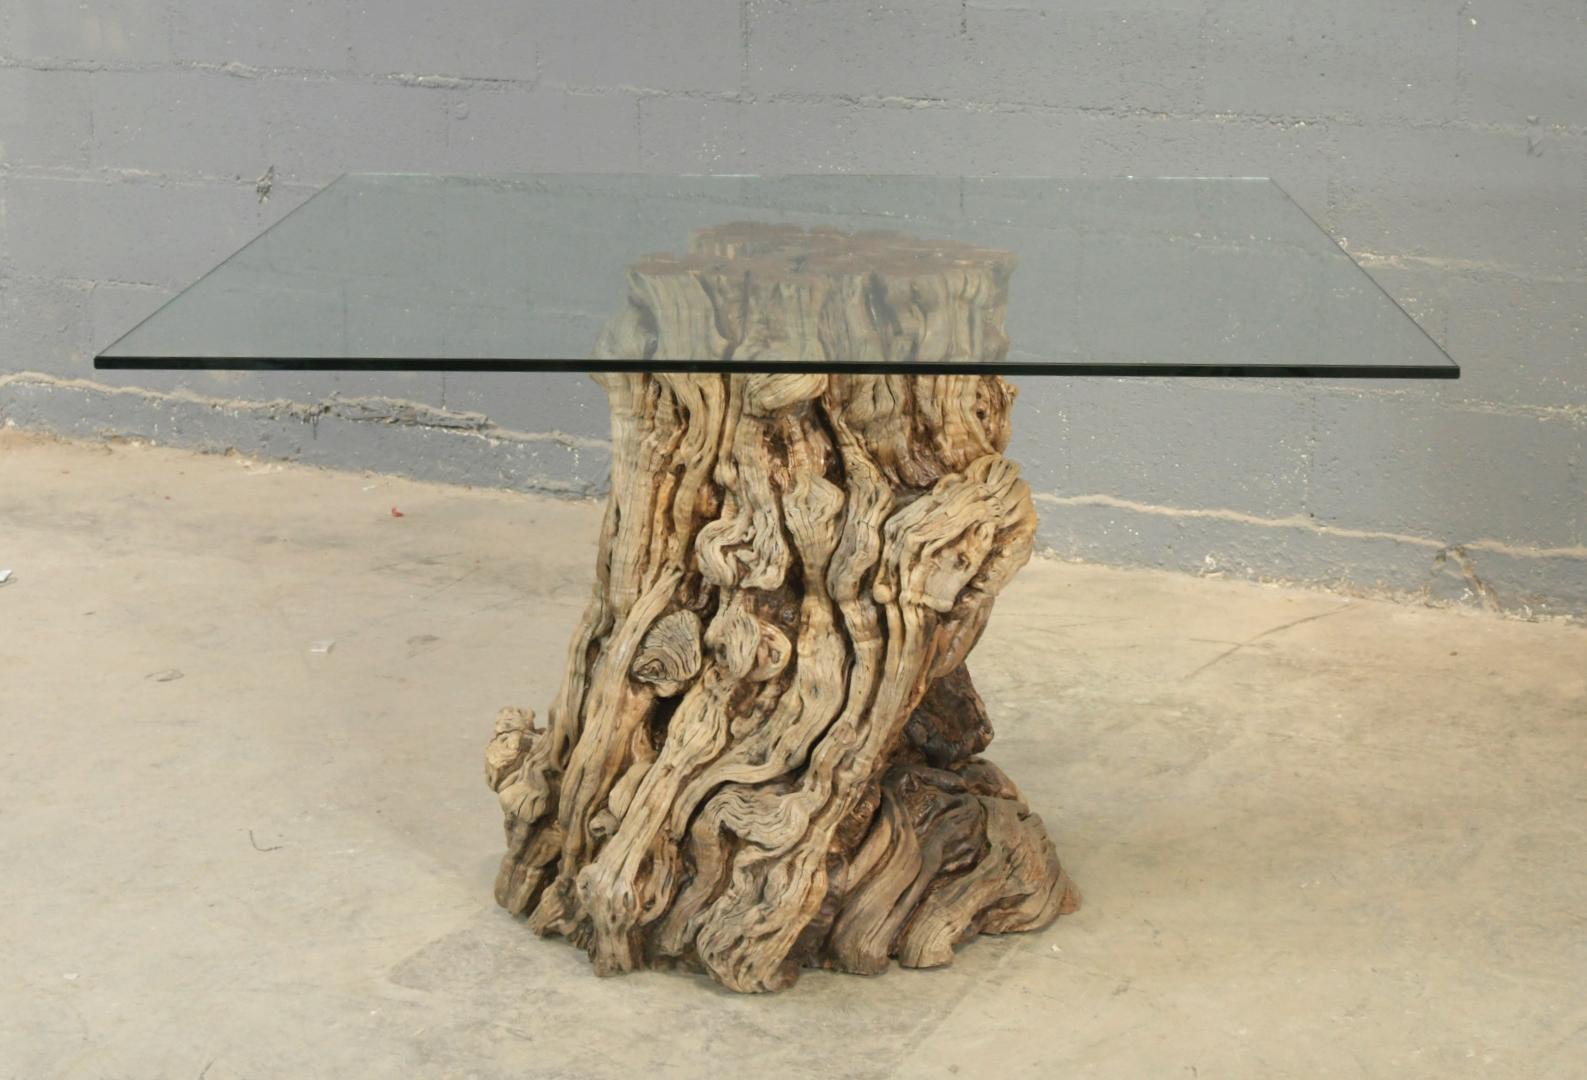 This stump from a California pepper tree has been naturally seasoned over 100 years. 

It can be purchased with the glass to be used as a coffee table, or without the glass to be used as a side table. 

There are a few stumps to choose from of